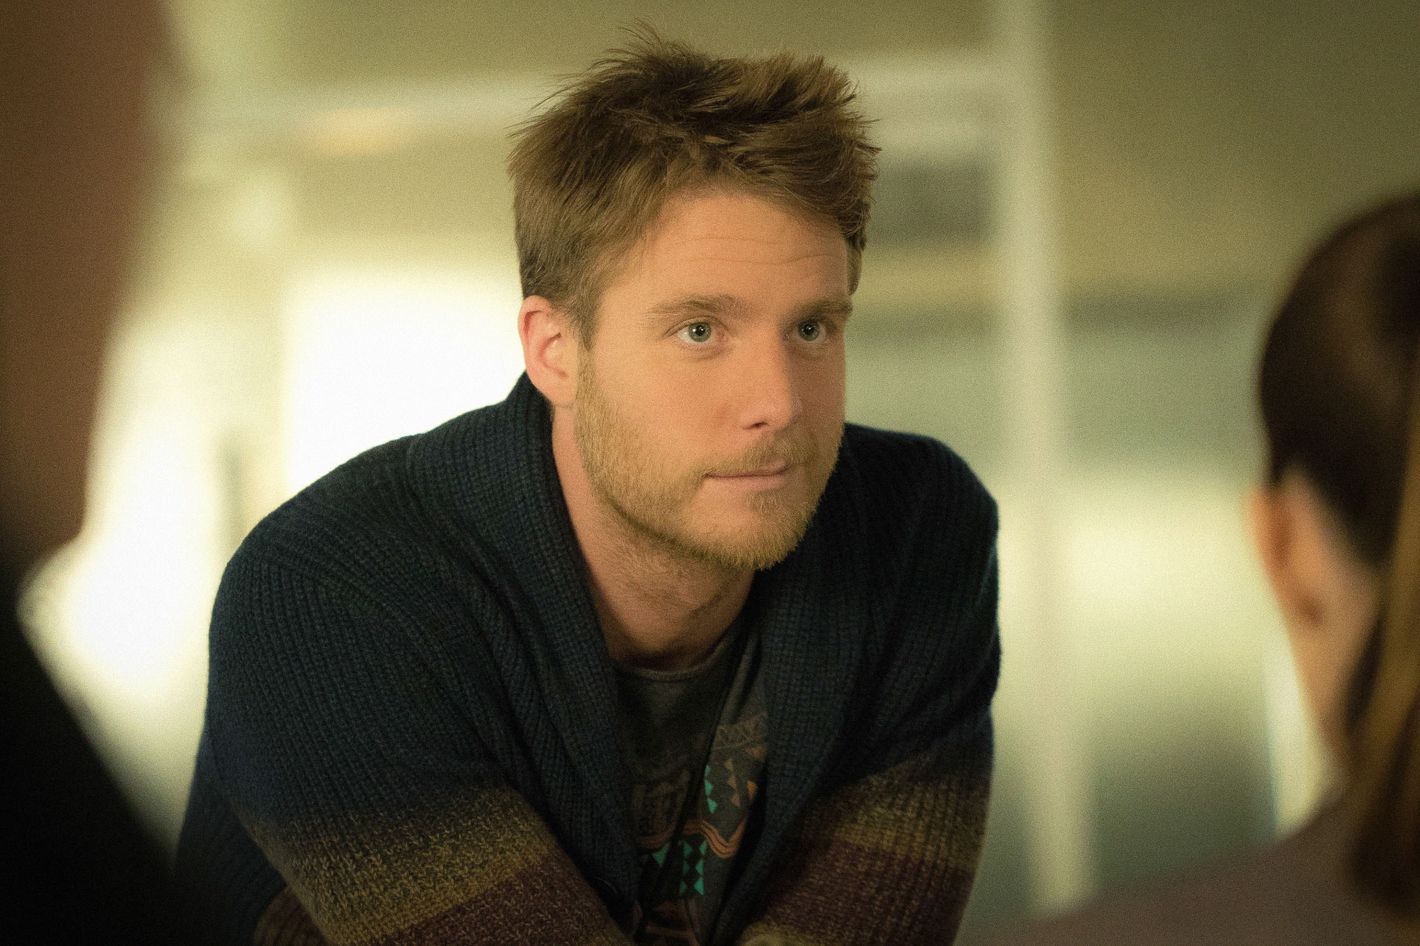 Limitless: Take a pill, become a celebrity